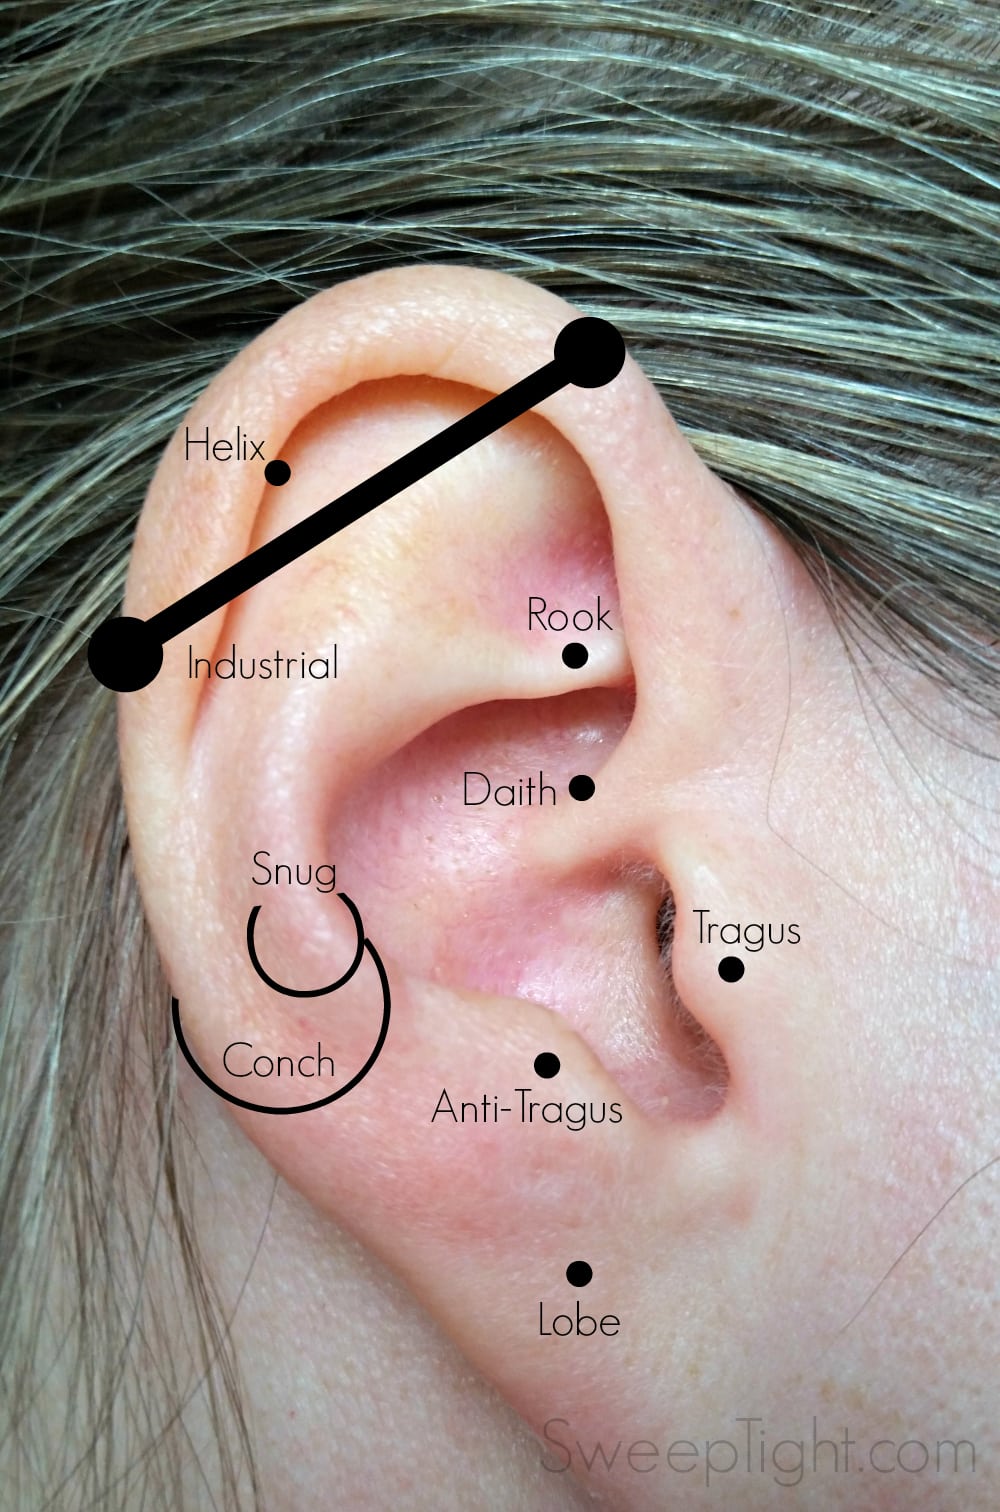 trying-daith-piercing-for-migraines-after-20-years-of-pain